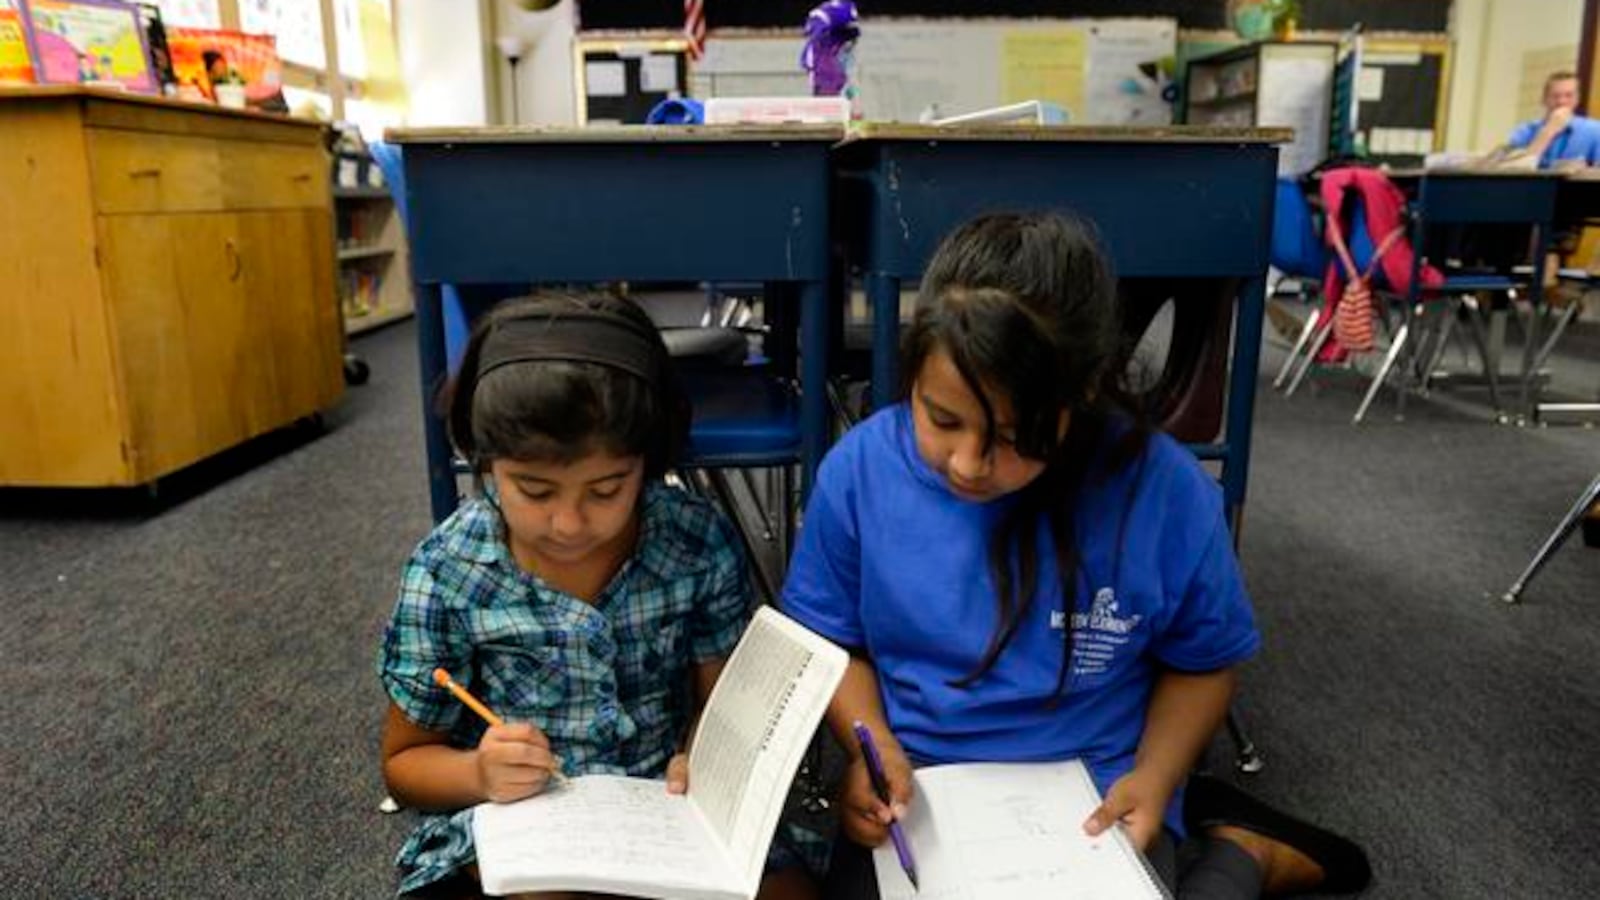 Fifth-graders Abril Magallanes, 10, left, and Julie Vazquez, 10, work together during a math lesson at McMeen Elementary School in 2014.